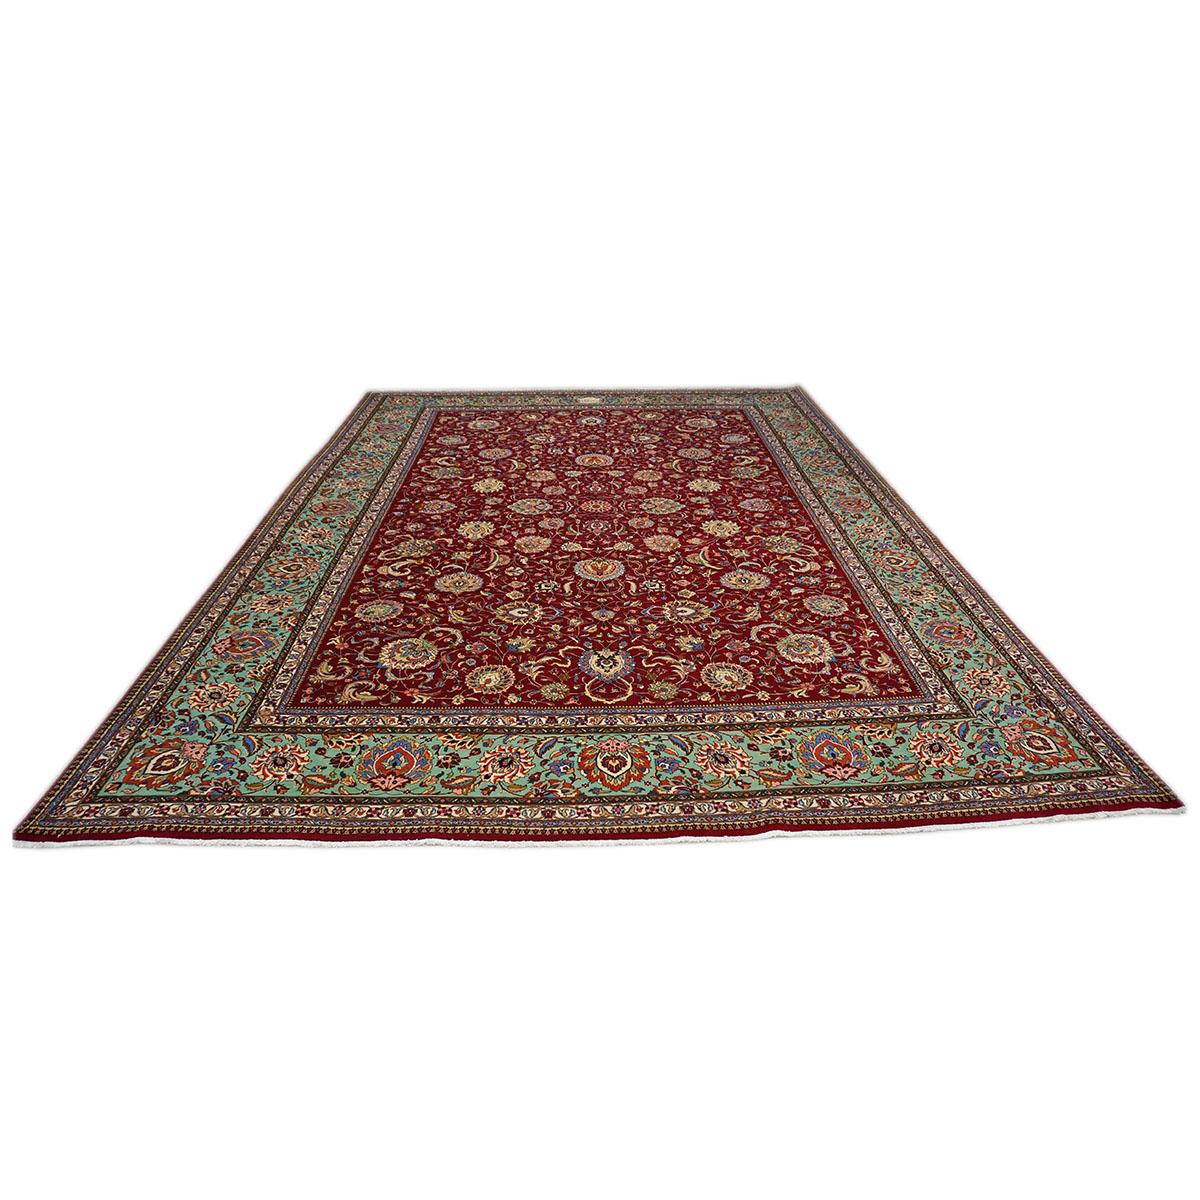  Ashly Fine Rugs presents a 1940s Antique Persian Pahlavi Tabriz 11x16 Wool Handmade Rug. Tabriz is a northern city in modern-day Iran and has forever been famous for the fineness and craftsmanship of its handmade rugs. These rugs are better known